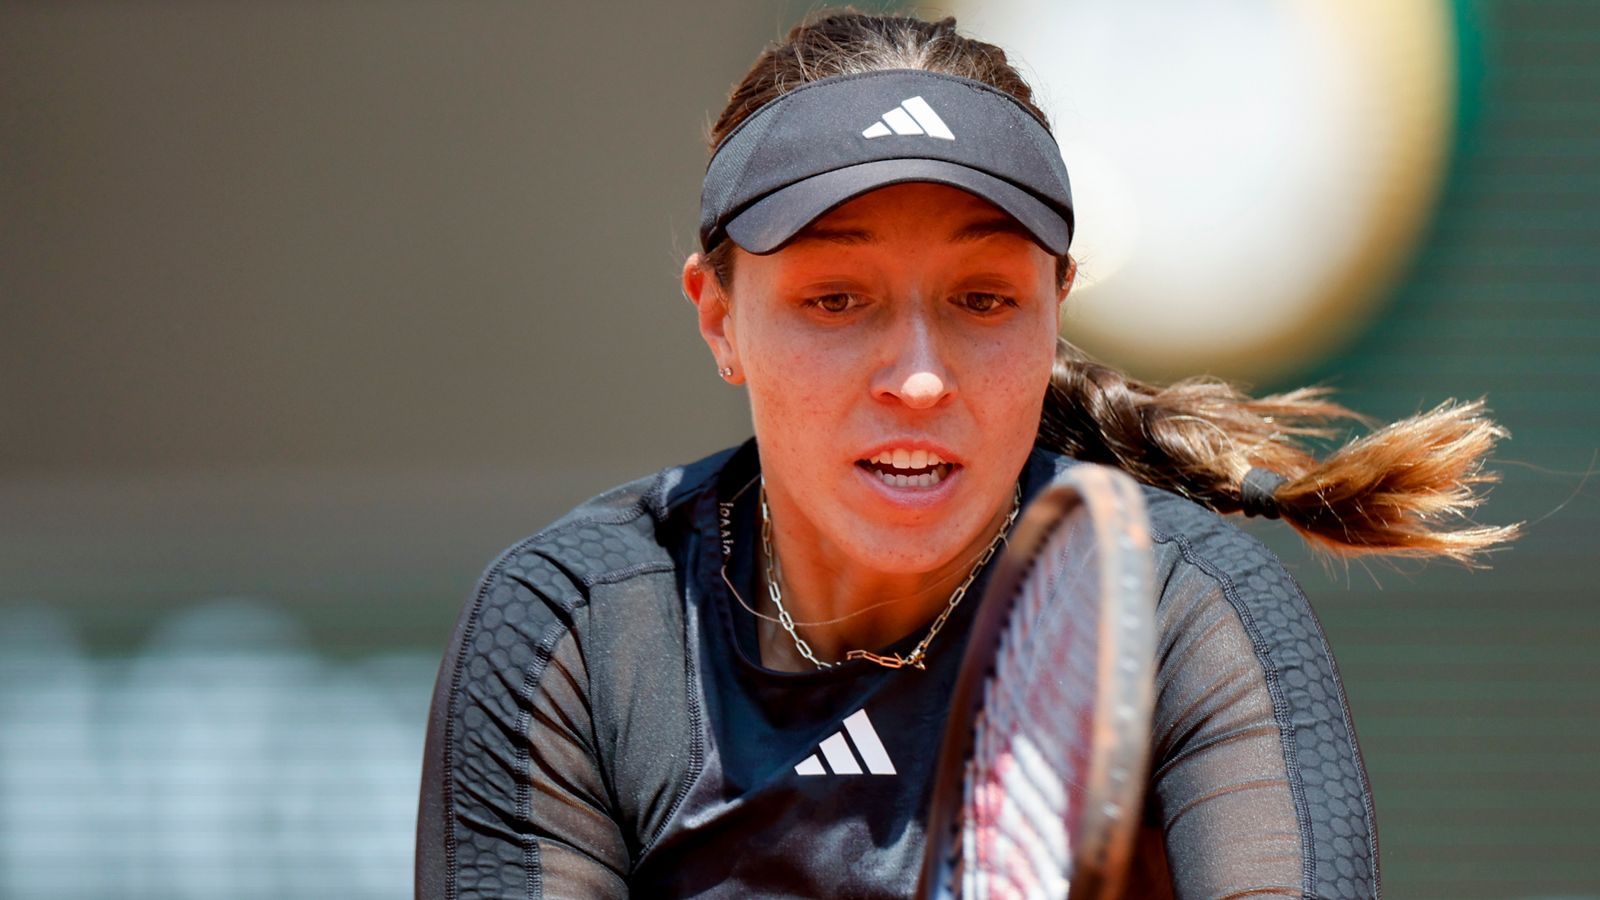 French Open: Jessica Pegula becomes highest-ranked women’s casualty as Aryna Sabalenka powers on | Tennis News